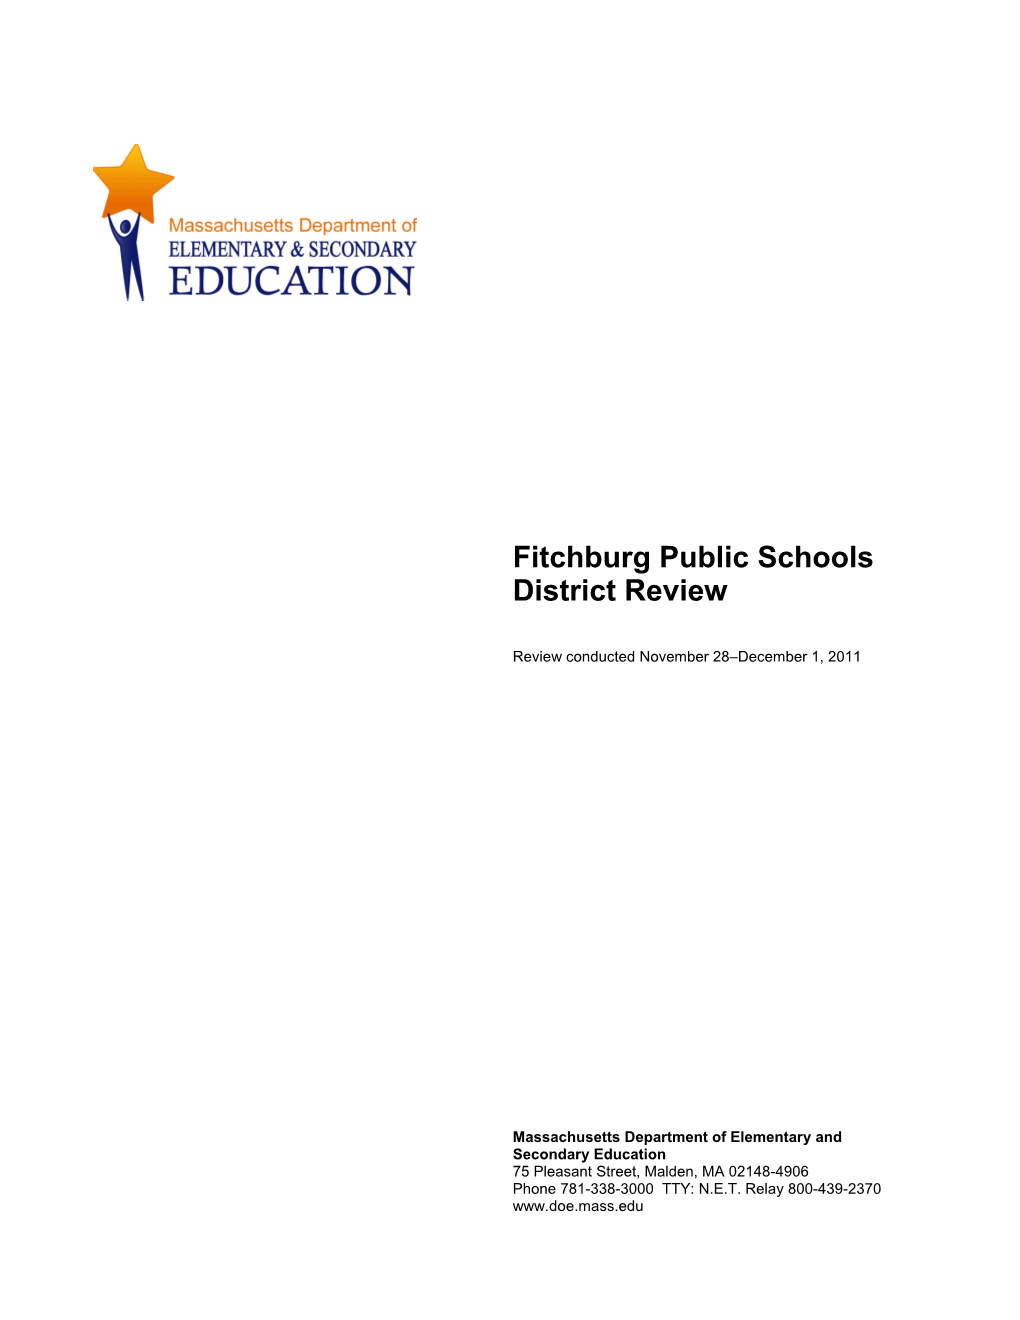 Fitchburg District Review Report, 2011 Onsite